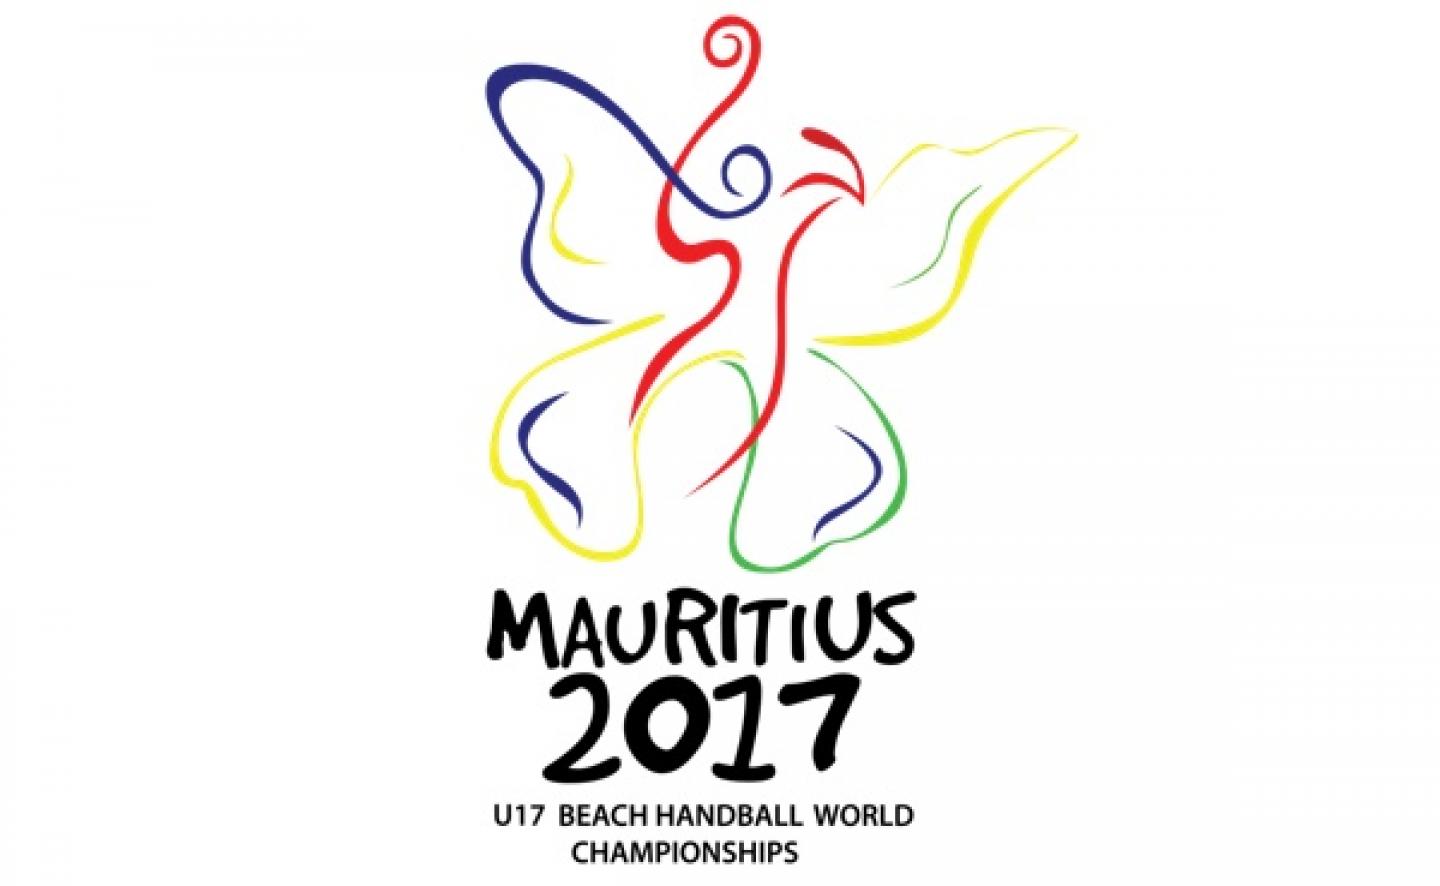 Mauritius 2017: Group A (men’s competition)